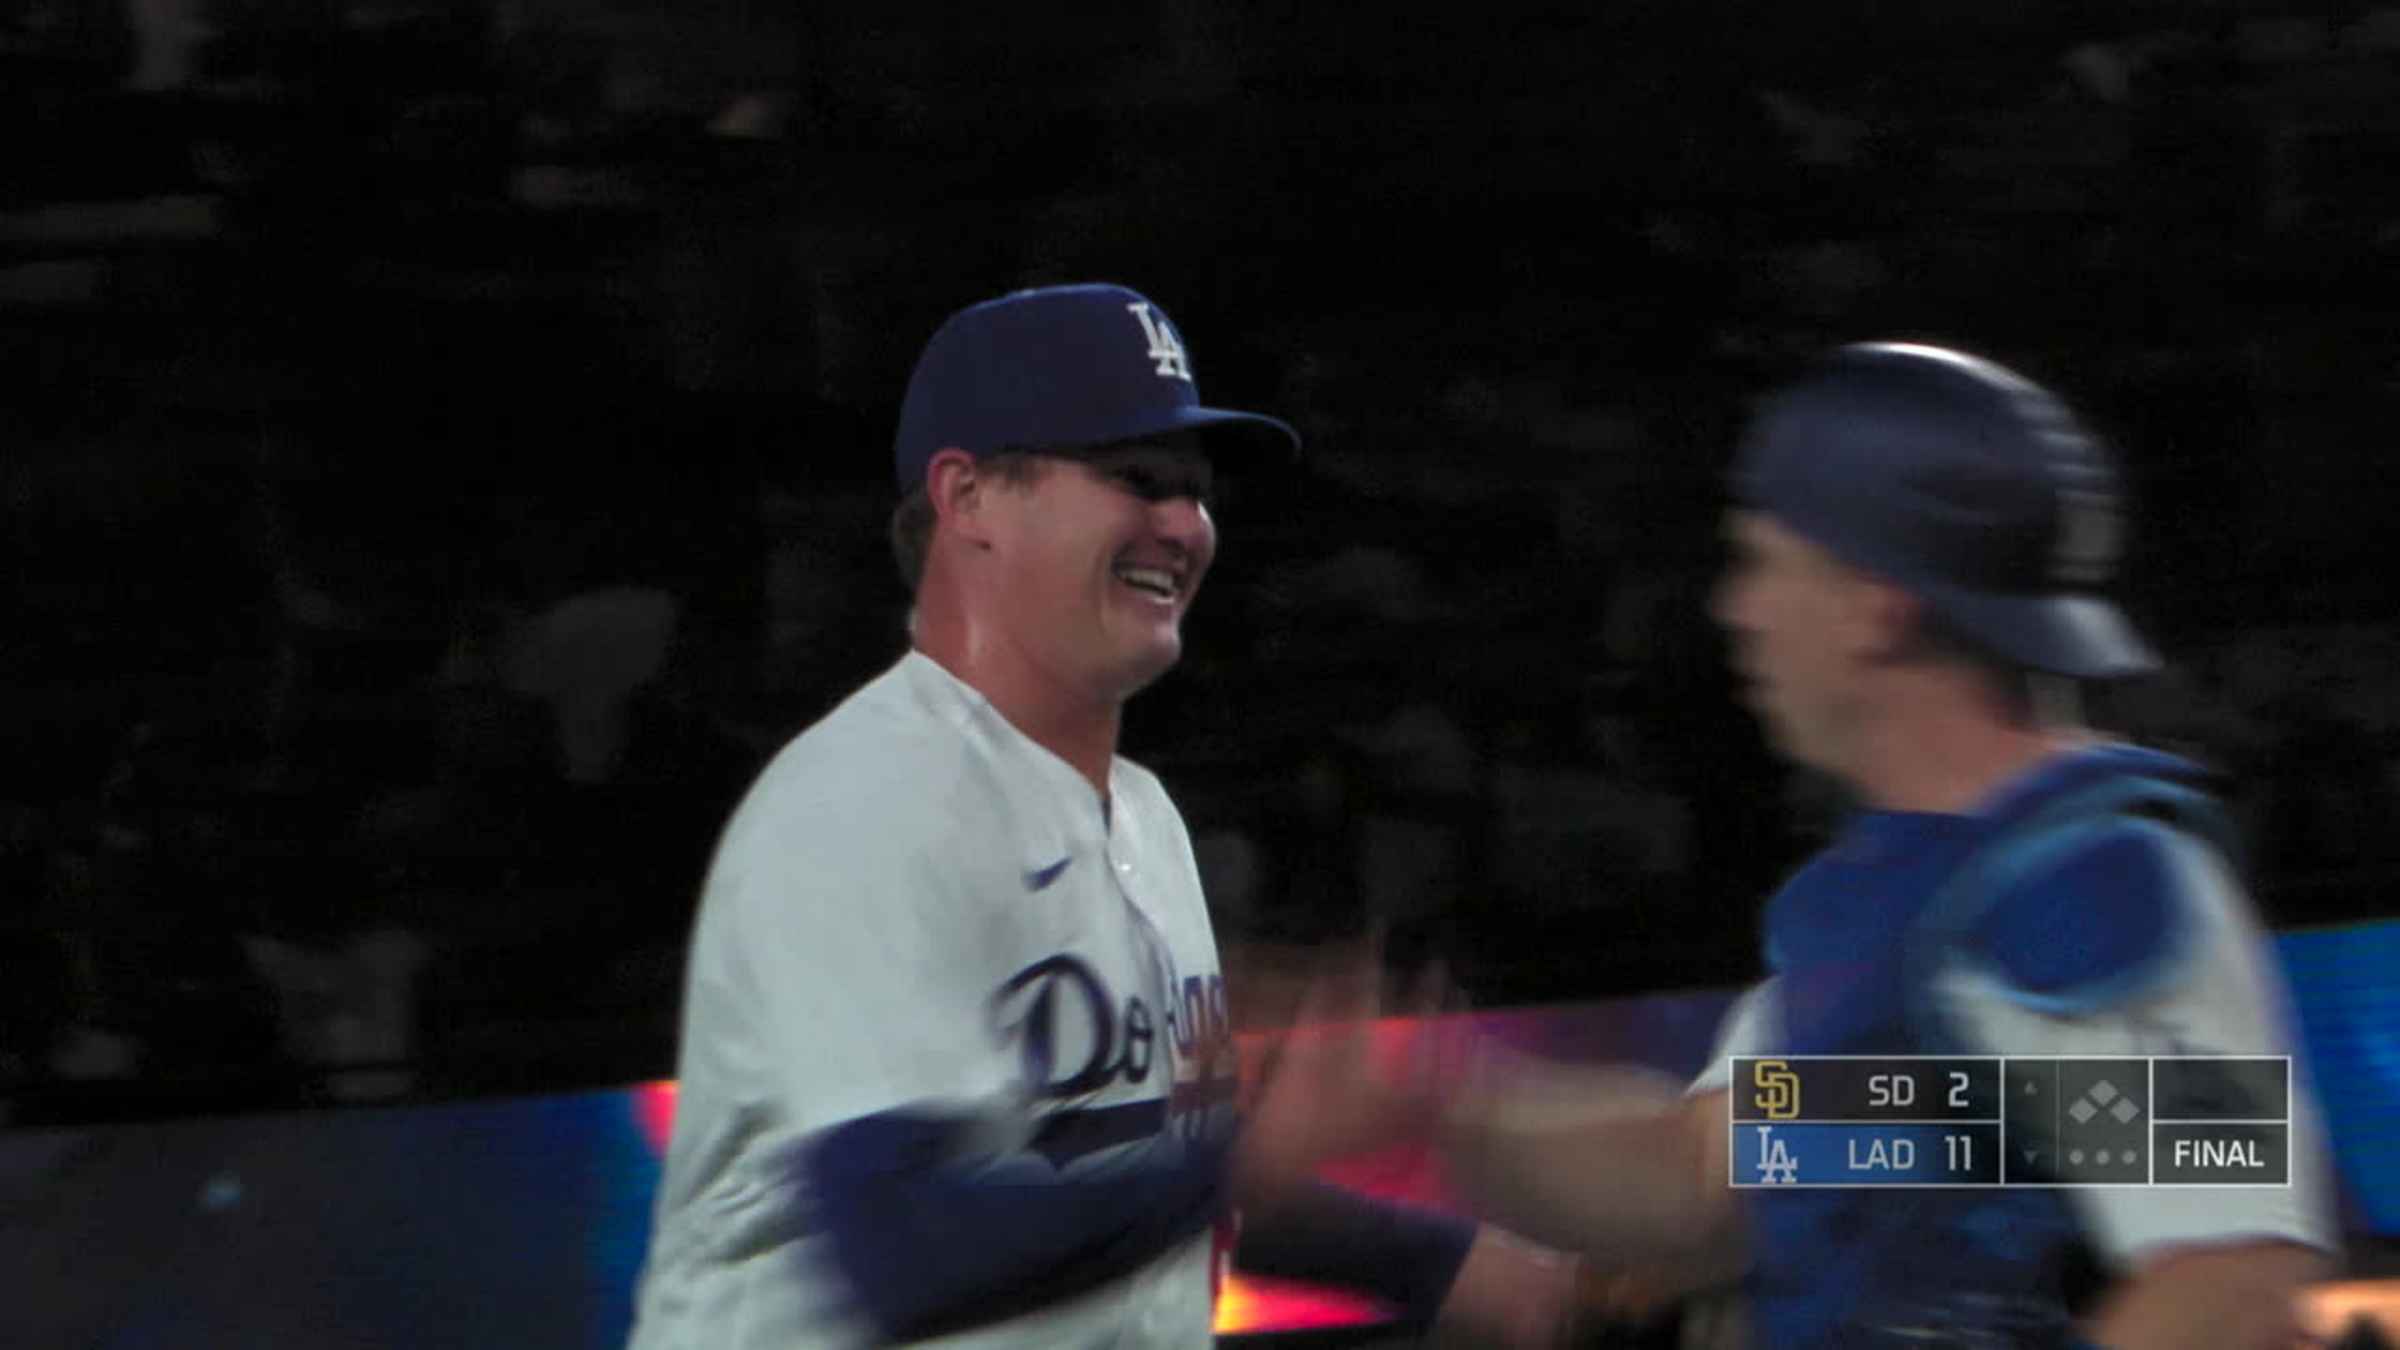 MLB Gameday Padres 2, Dodgers 11 Final Score (09/12/2023)